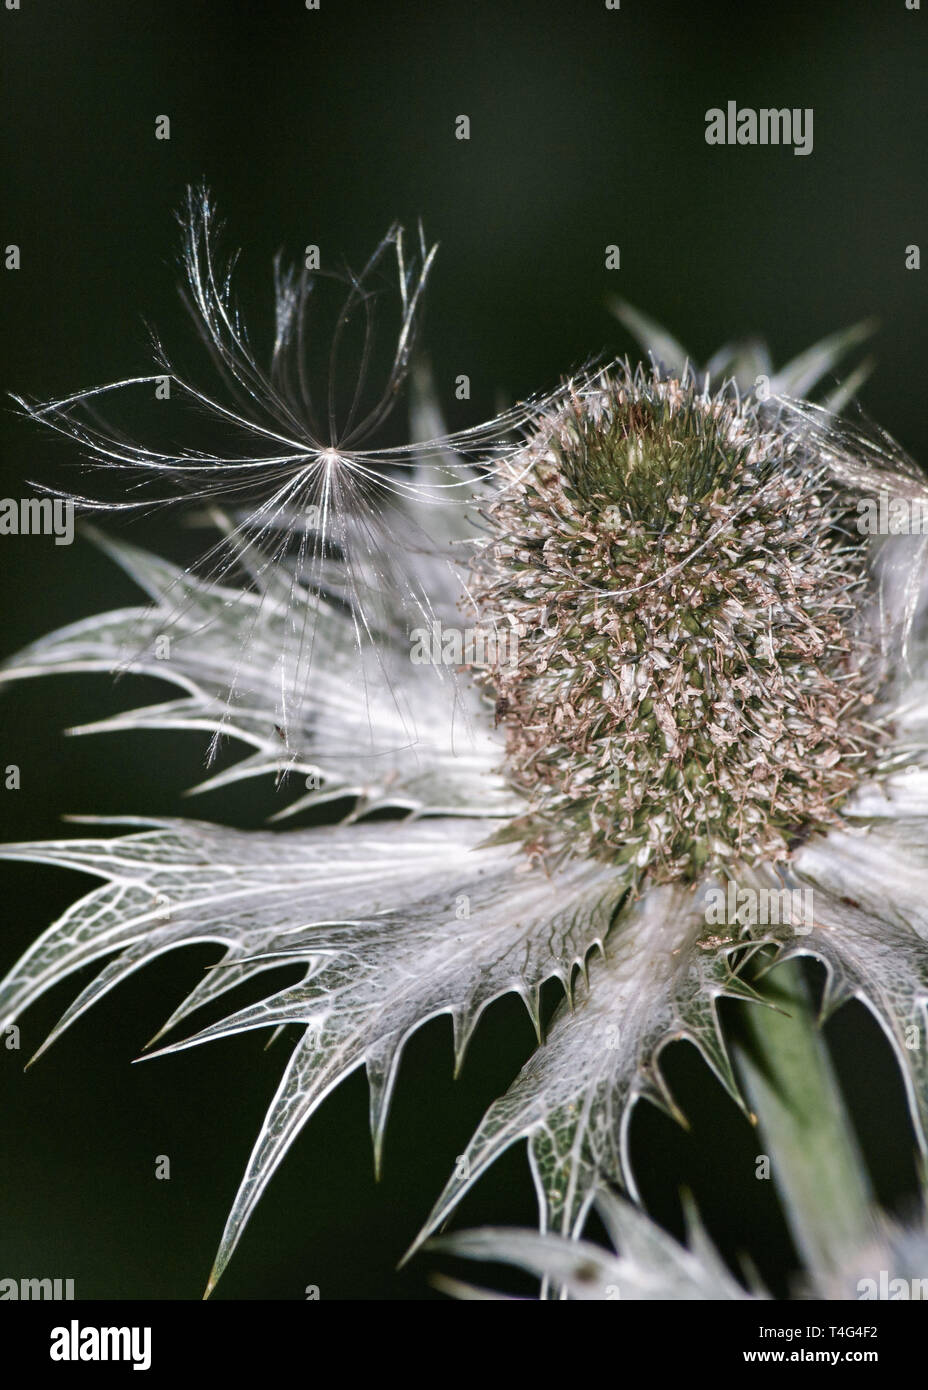 a dandelion seed landing on a spiky thistle Stock Photo